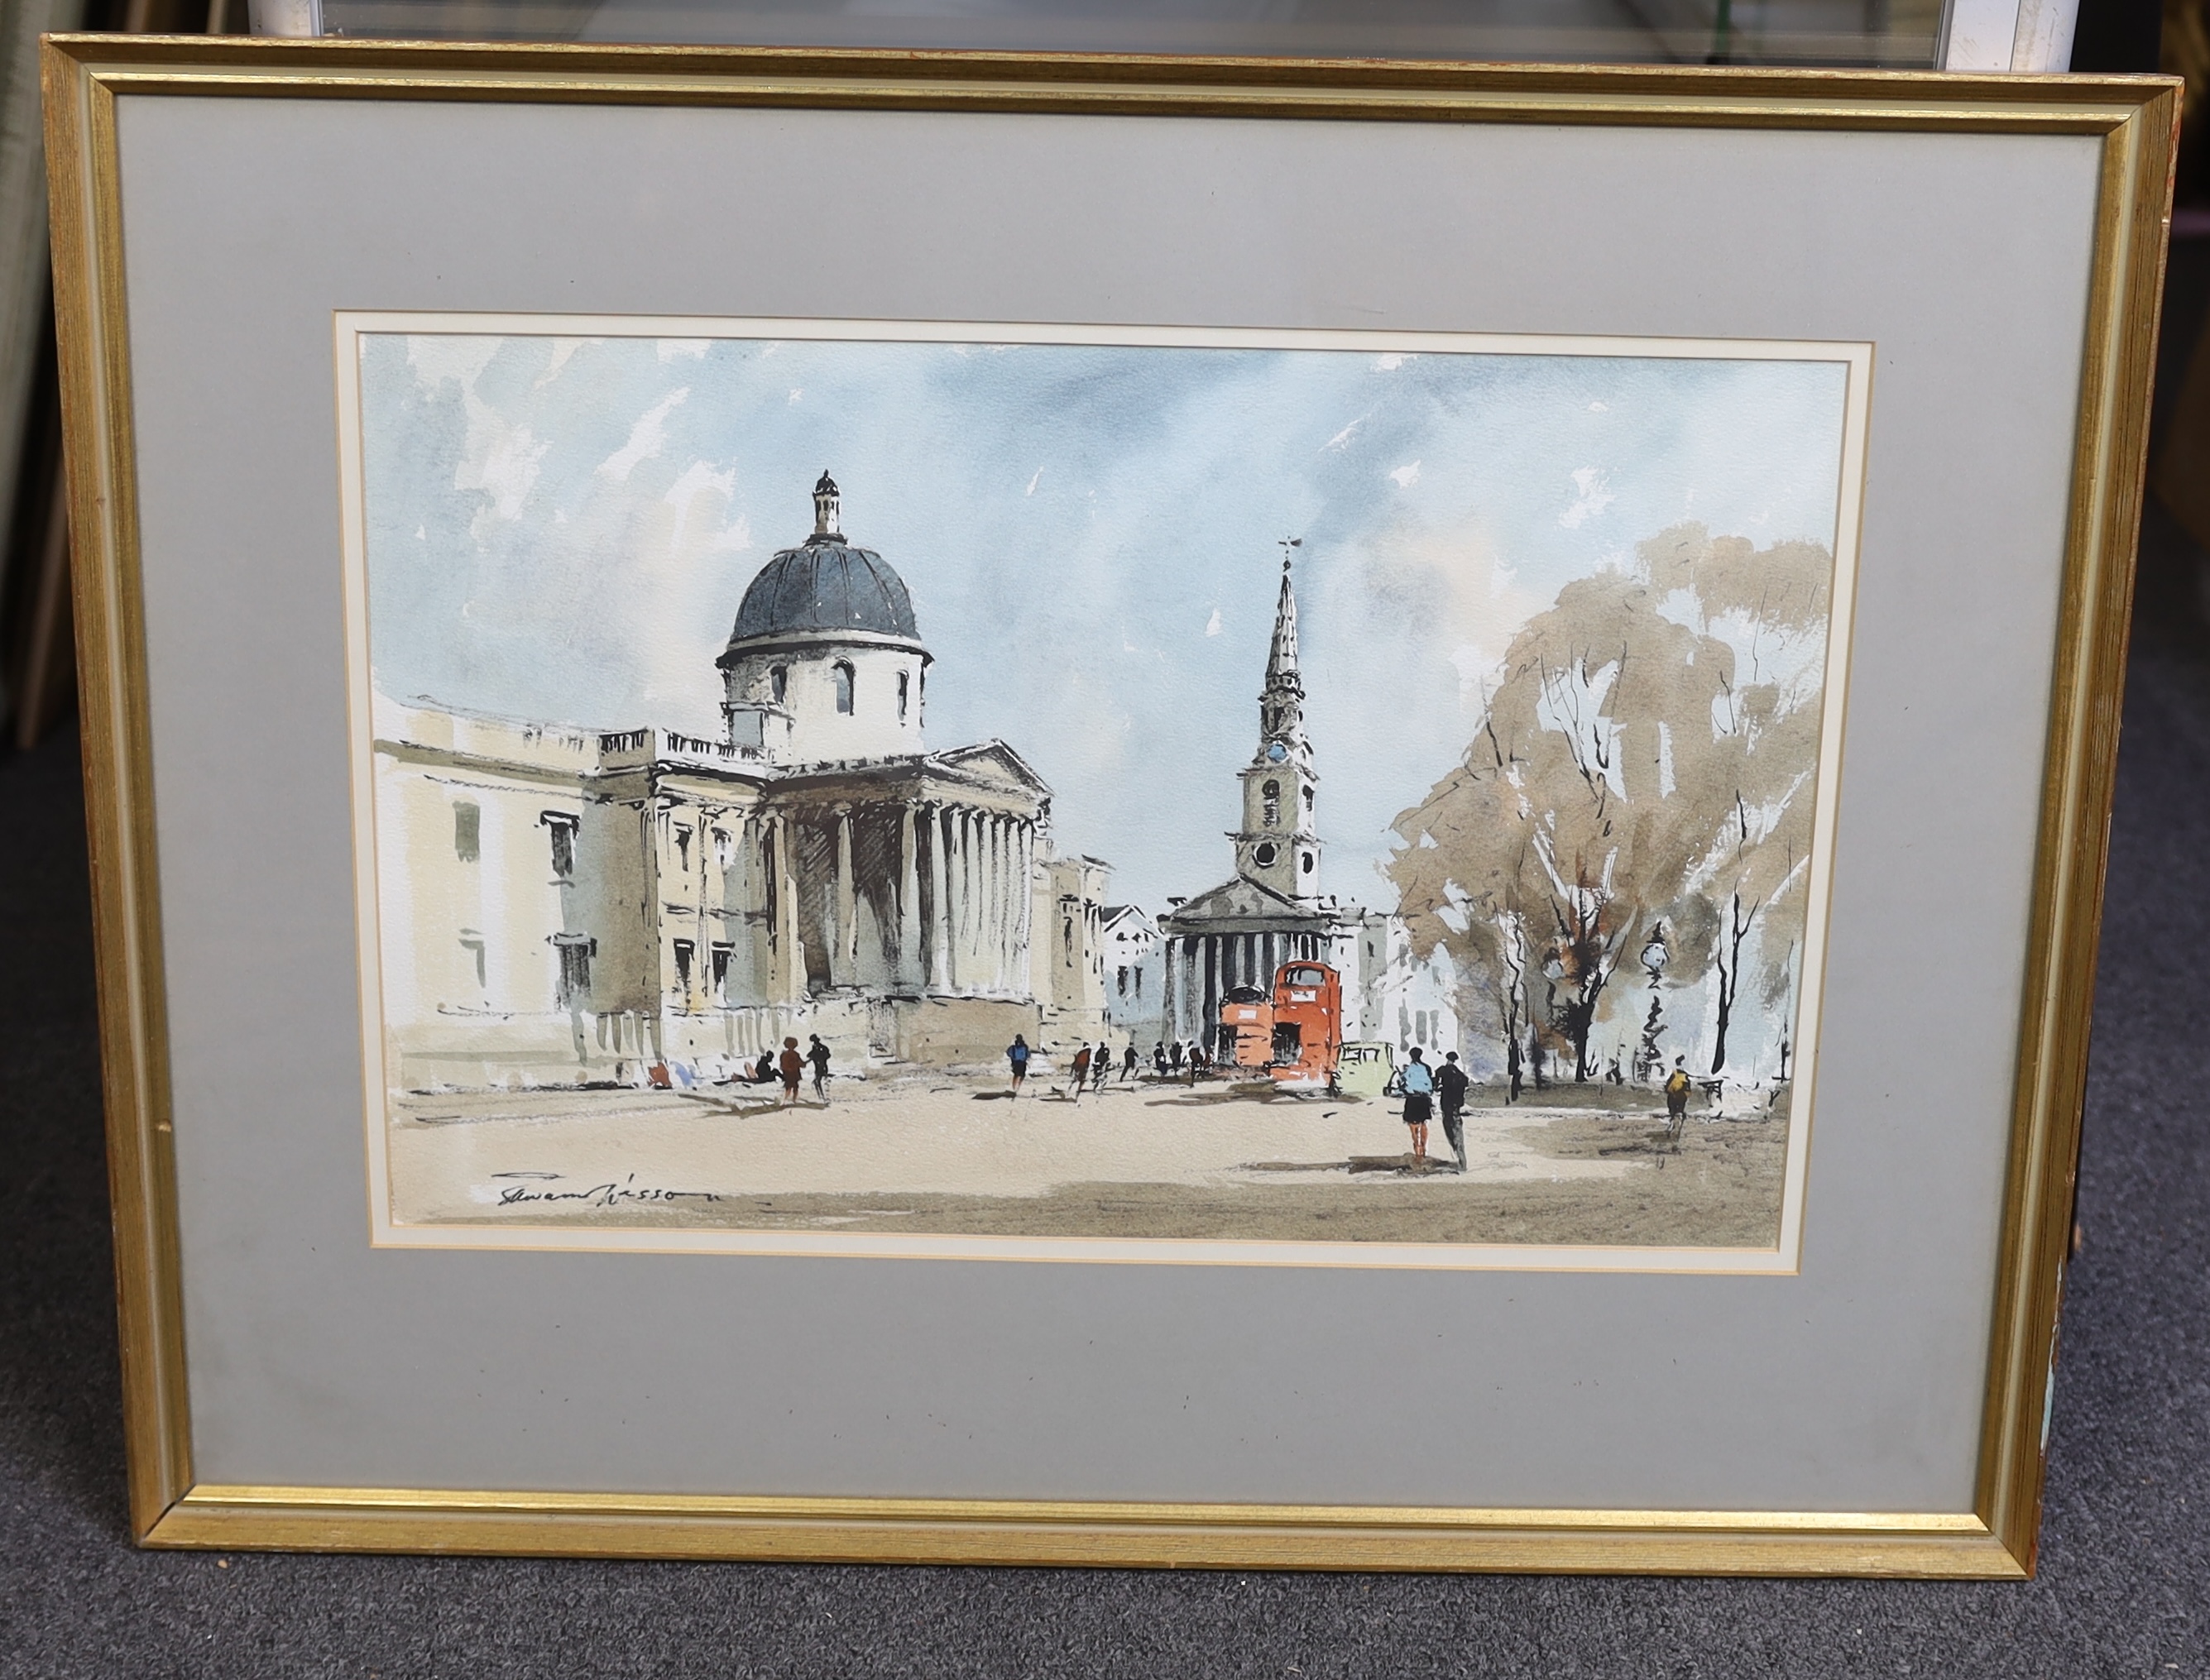 Edward Wesson (English, 1910-1983), ink and watercolour, National Gallery and St Martin's, signed, 32 x 49cm. Condition - fair to good